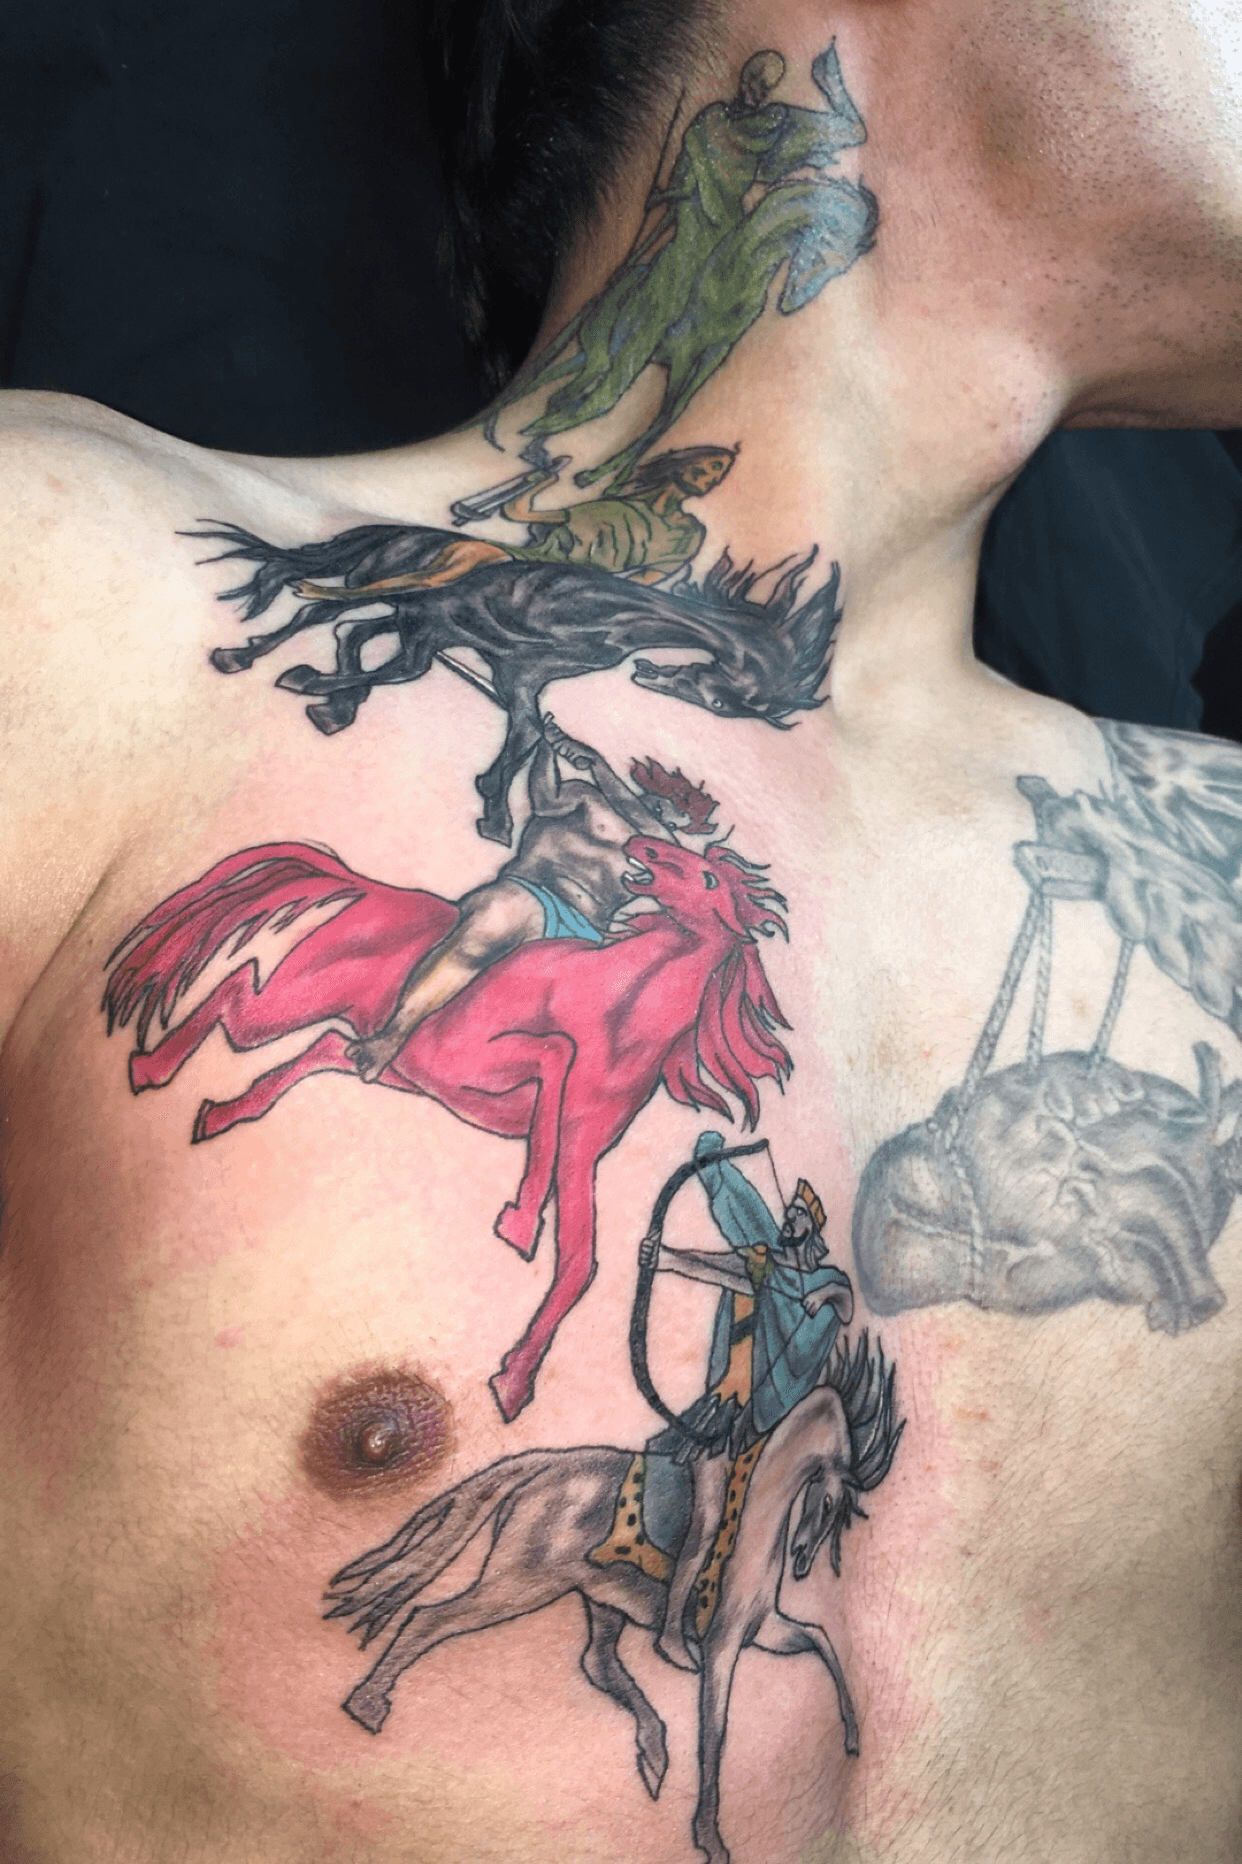 10 best 4 horsemen of the apocalypse tattoo ideas that will blow your mind    Daily Hind News